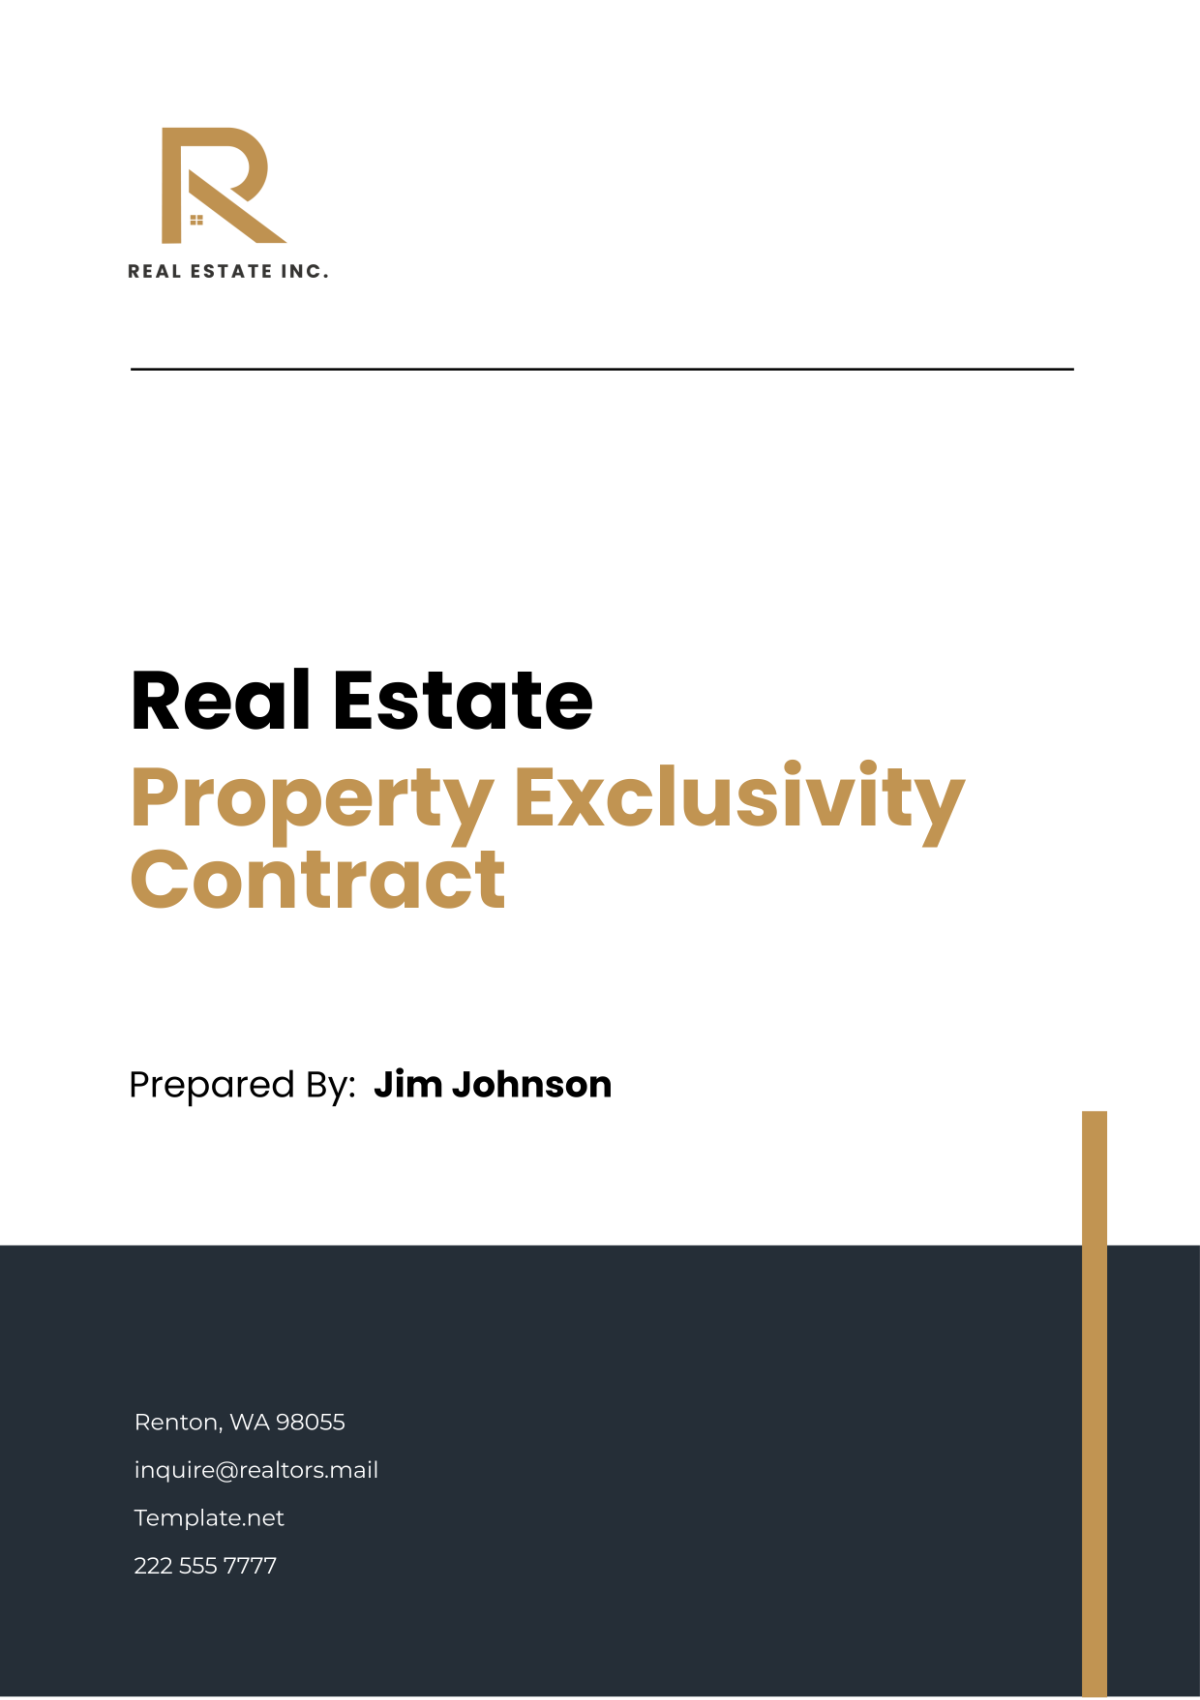 Real Estate Property Exclusivity Contract Template